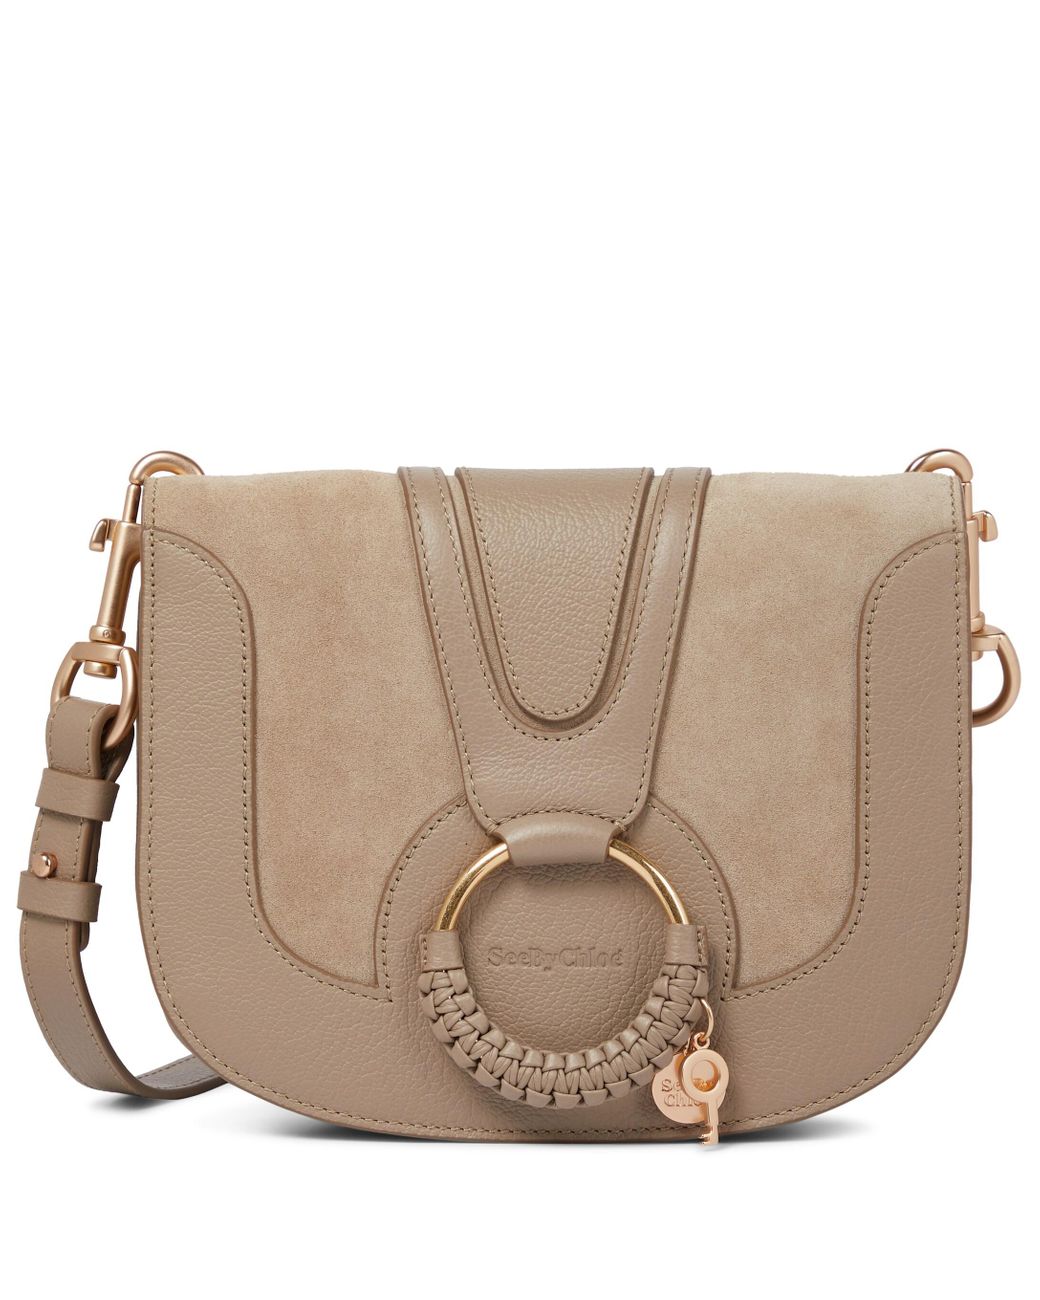 See By Chloé Leather Hana Shoulder Bag in Grey (Gray) - Save 14 